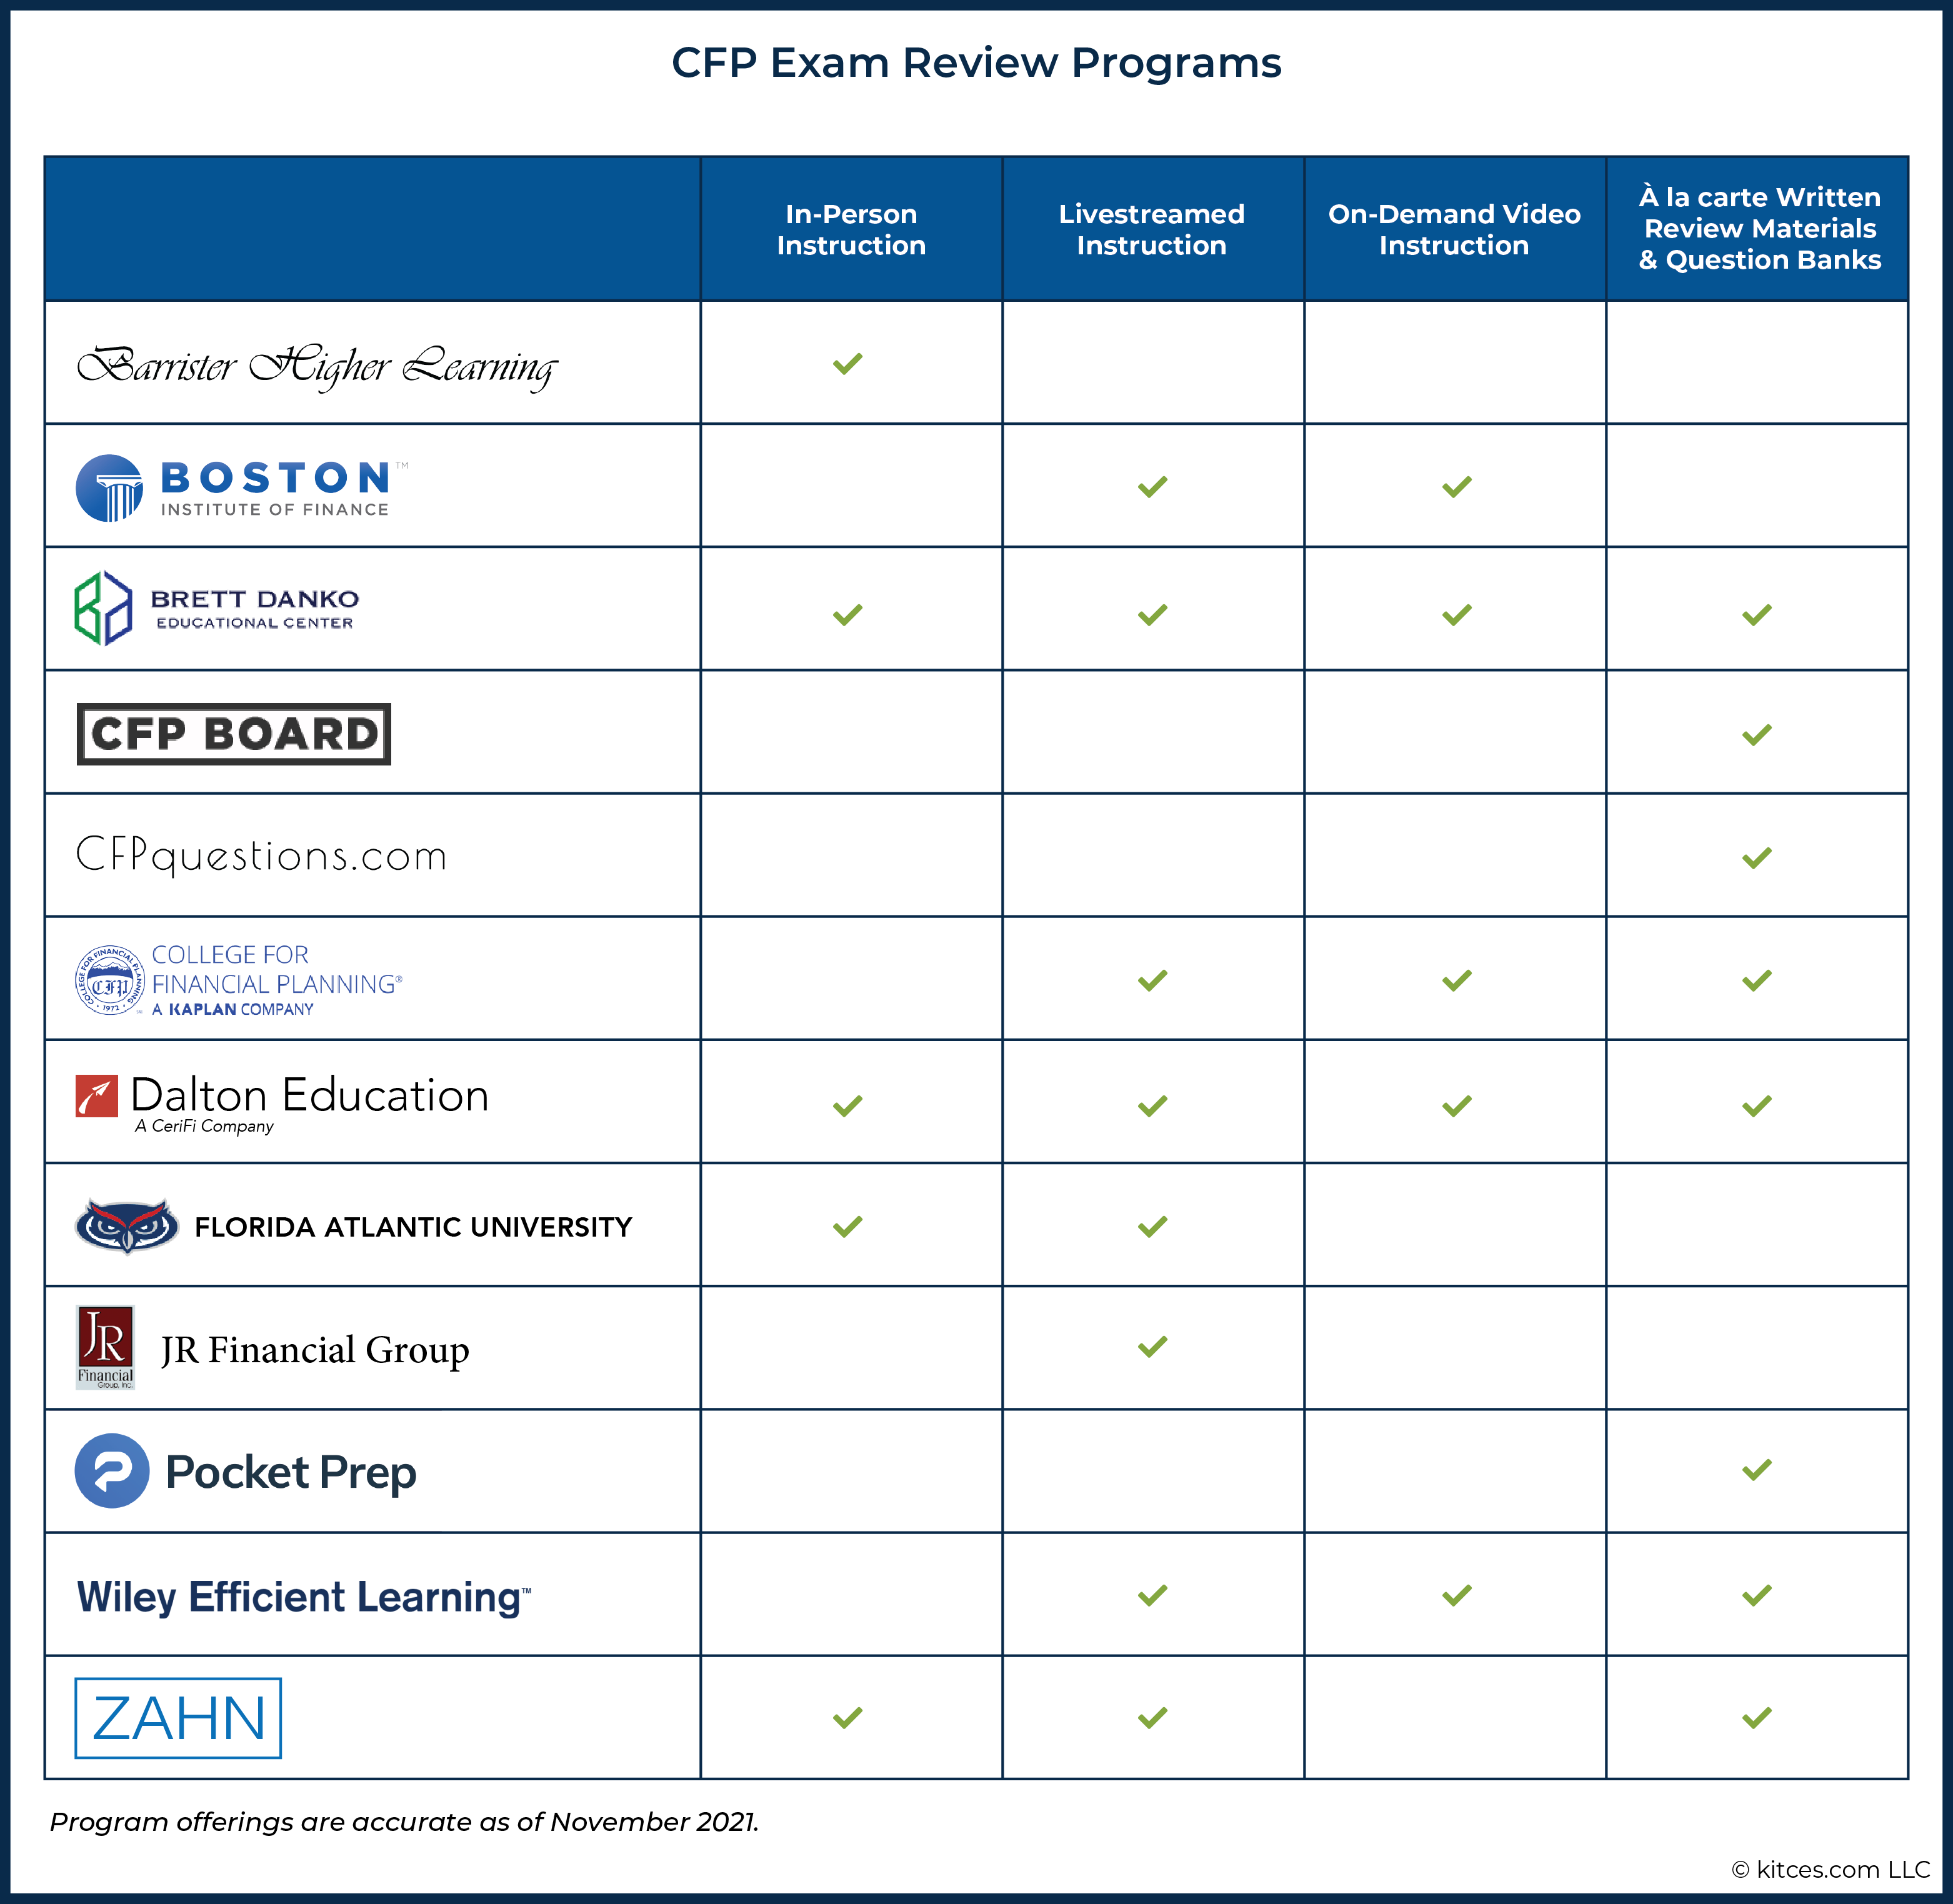 How To Choose The Best CFP Exam Review Program (For You)